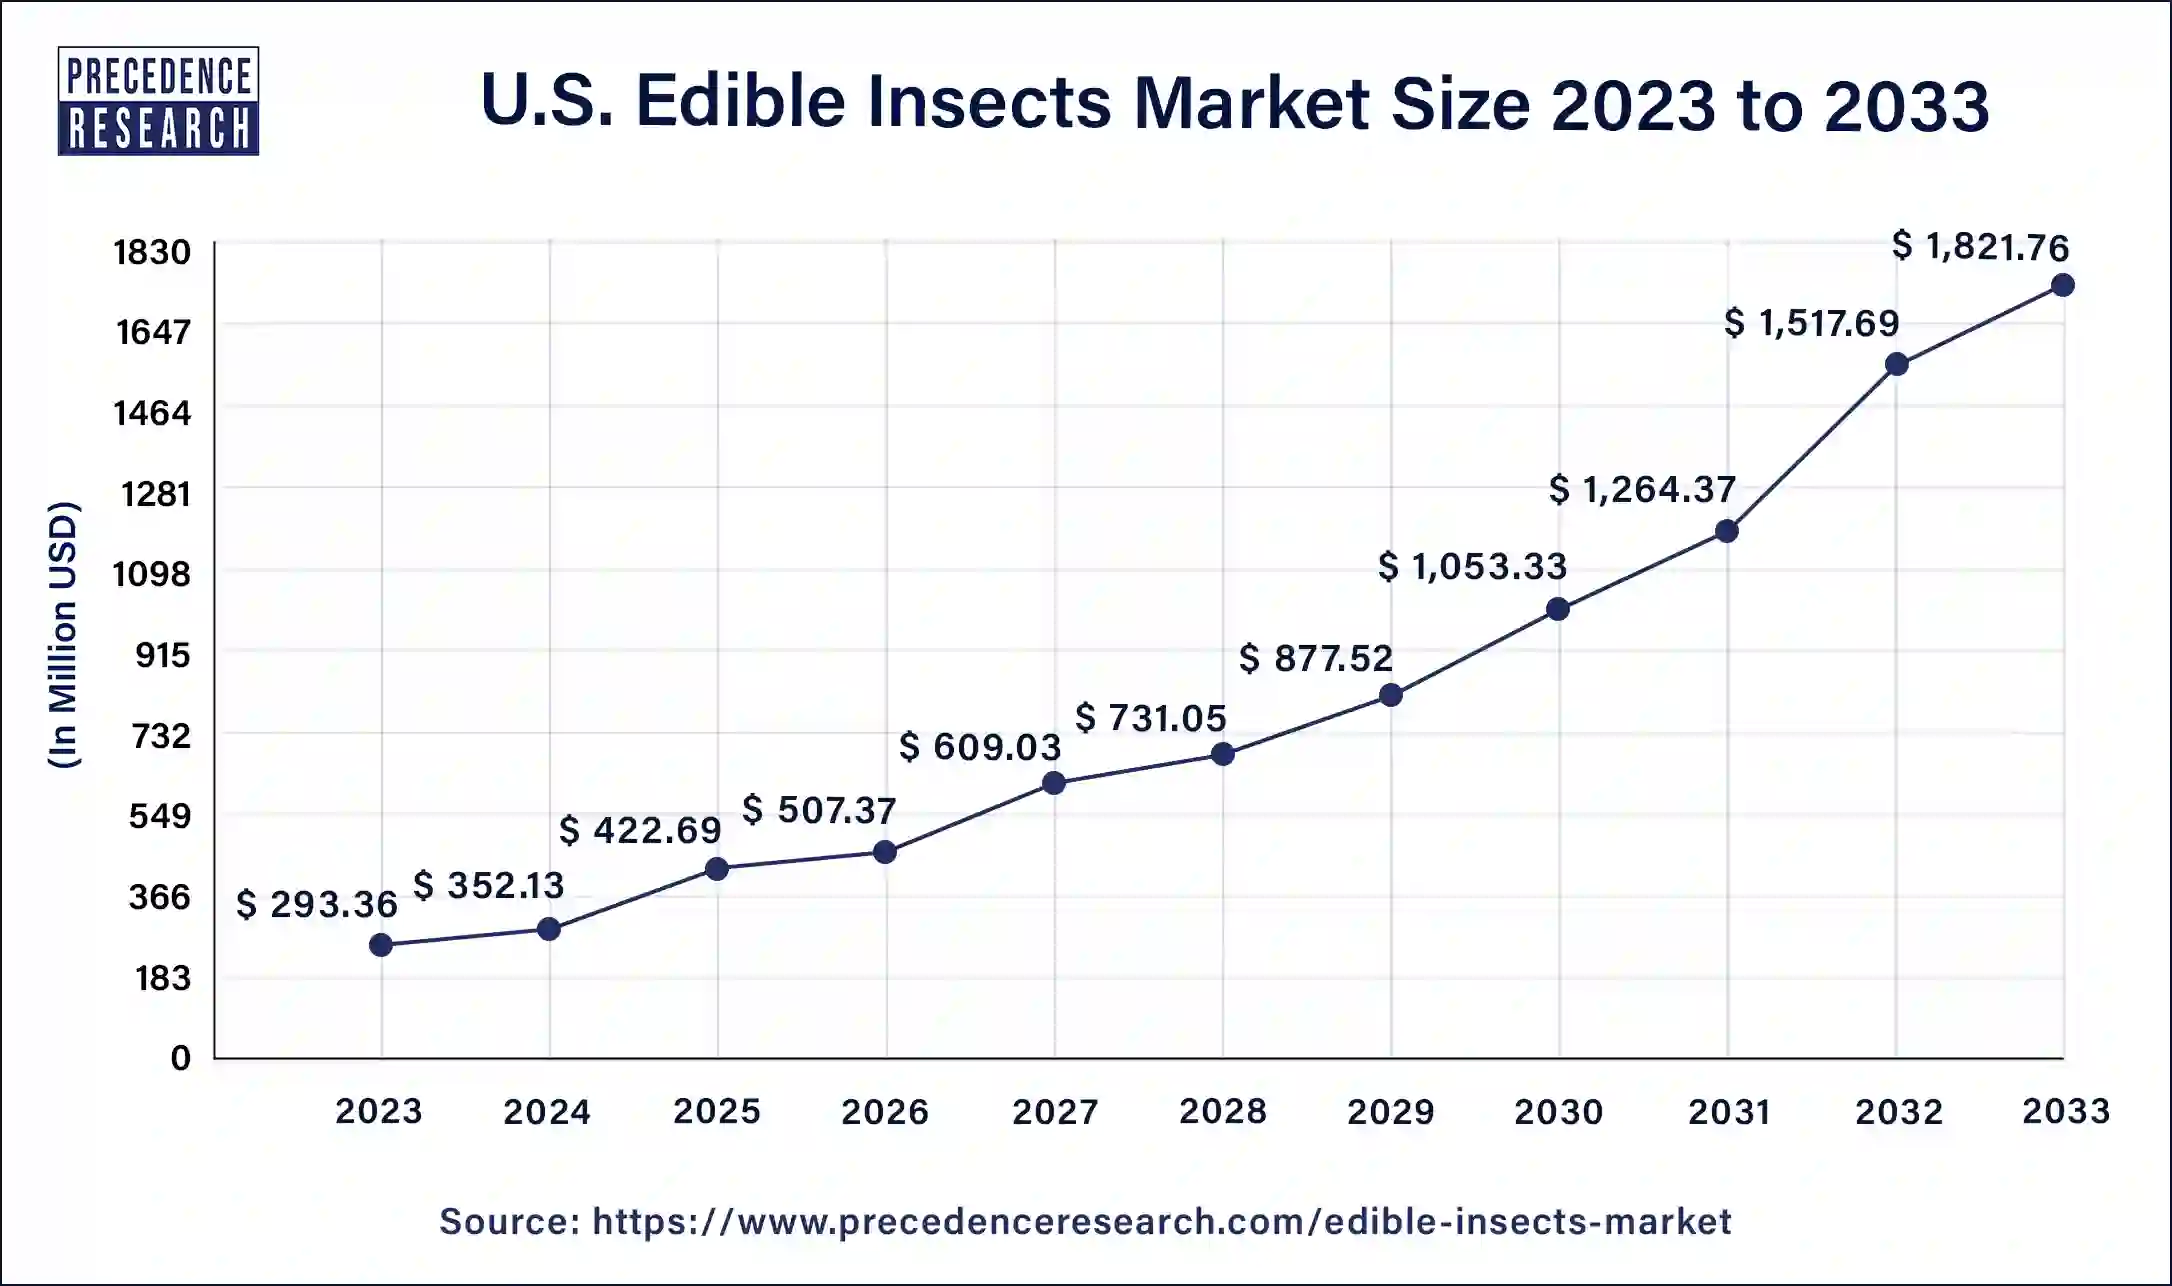 U.S. Edible Insects Market Size 2024 to 2033